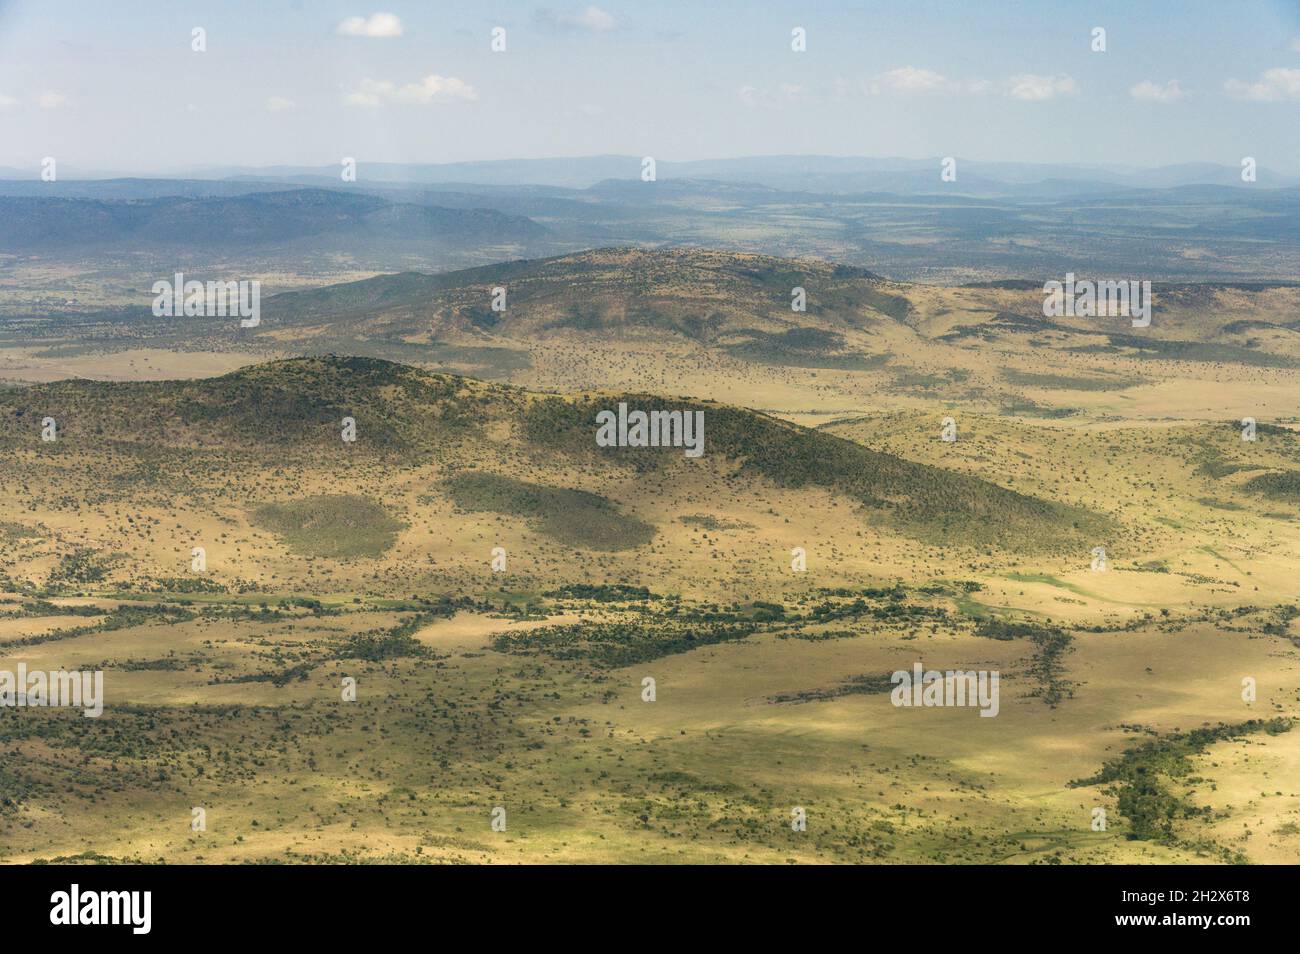 Aerial view of undulating semi arid hills dotted with trees, Kenya Stock Photo